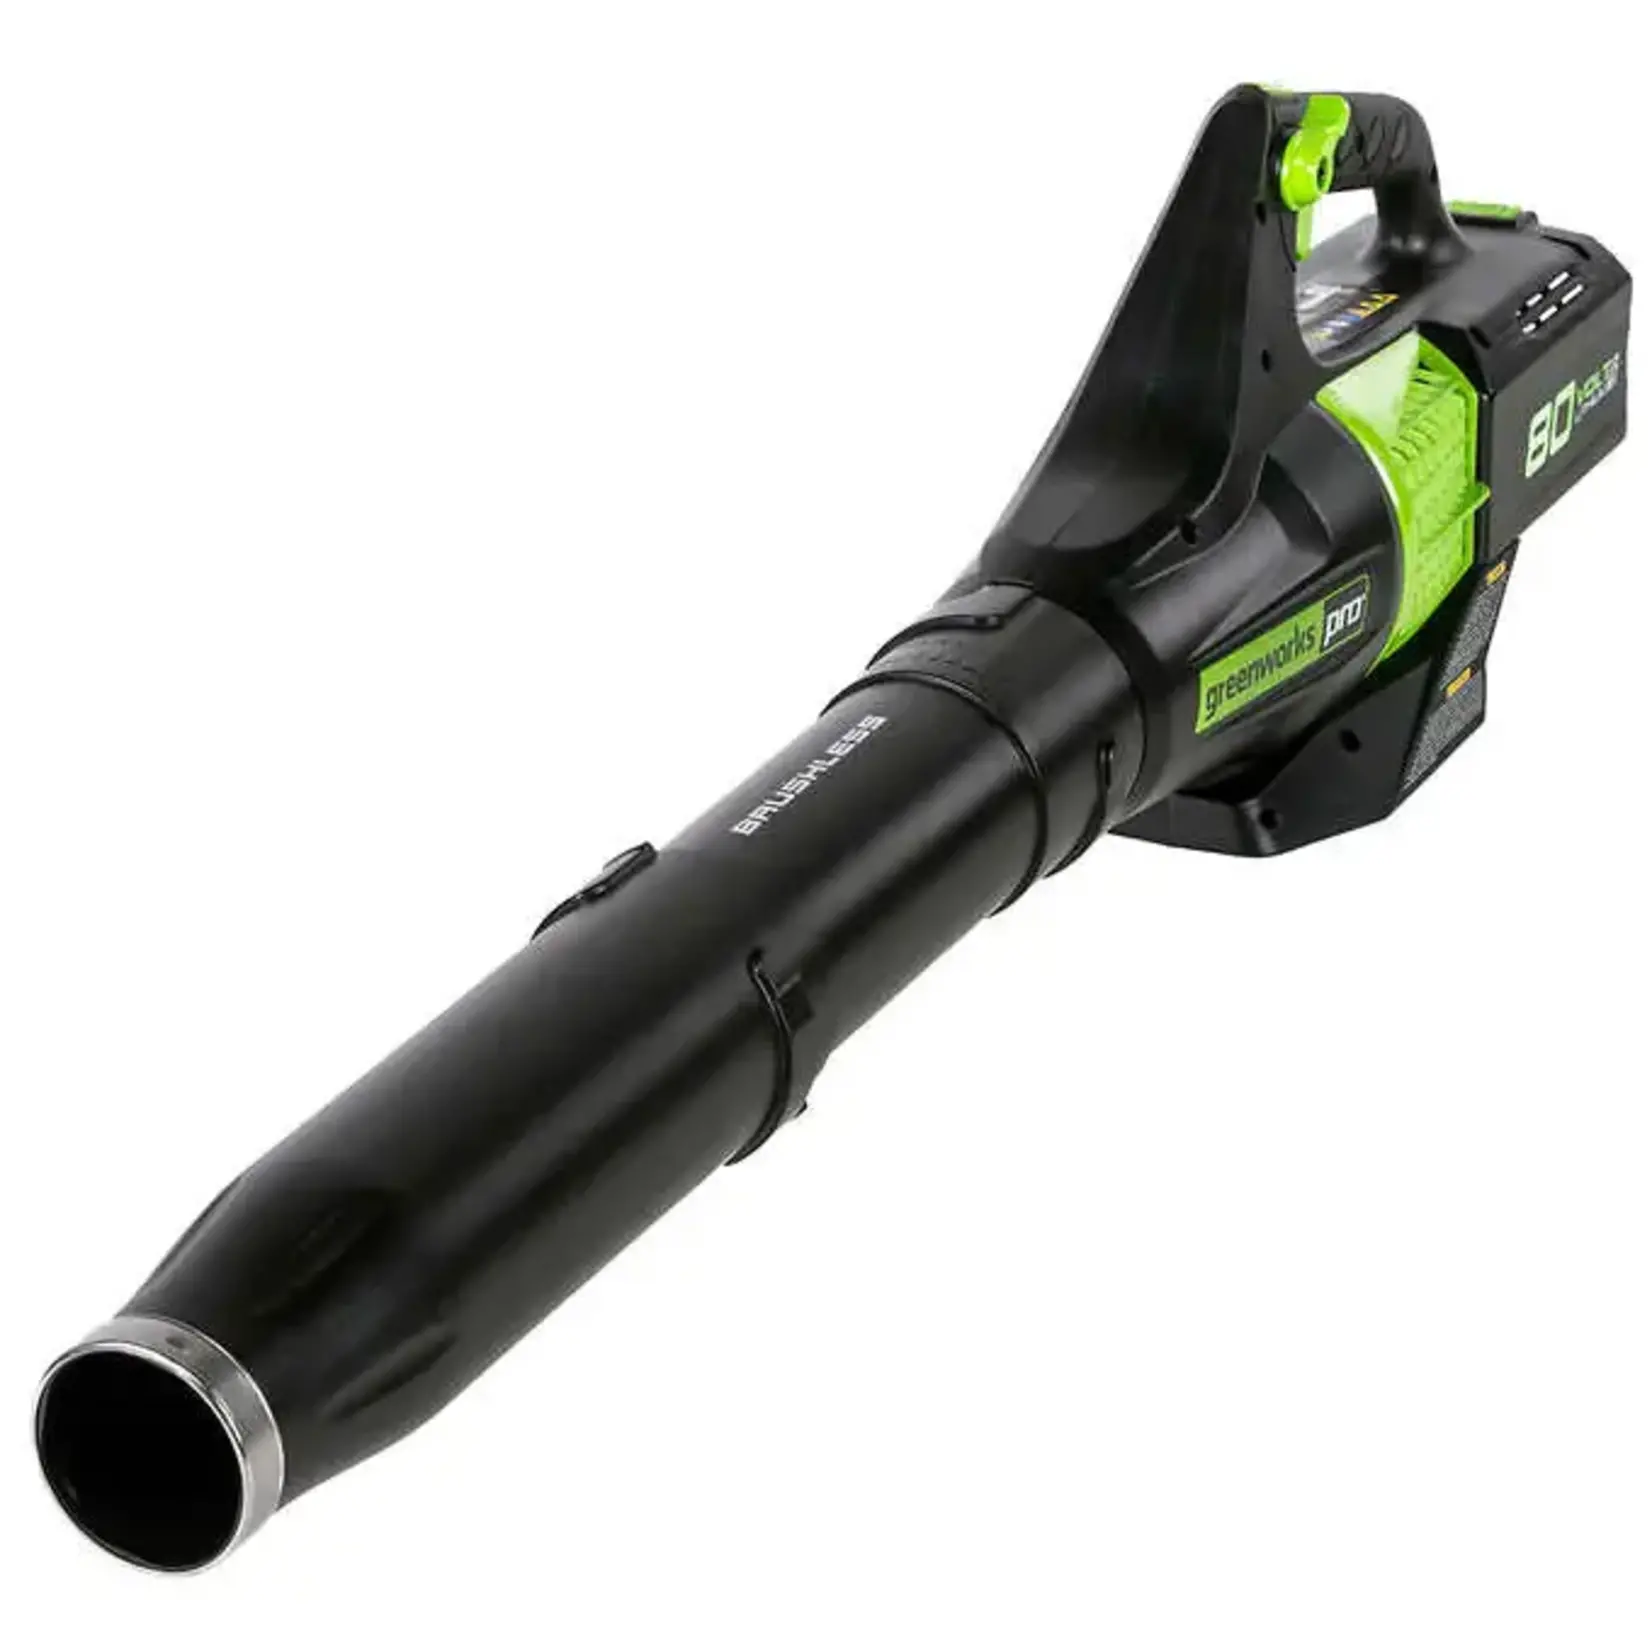 Greenworks 80V Axial Blower, 2.0 AH Battery and Rapid Charger - Greenworks Pro